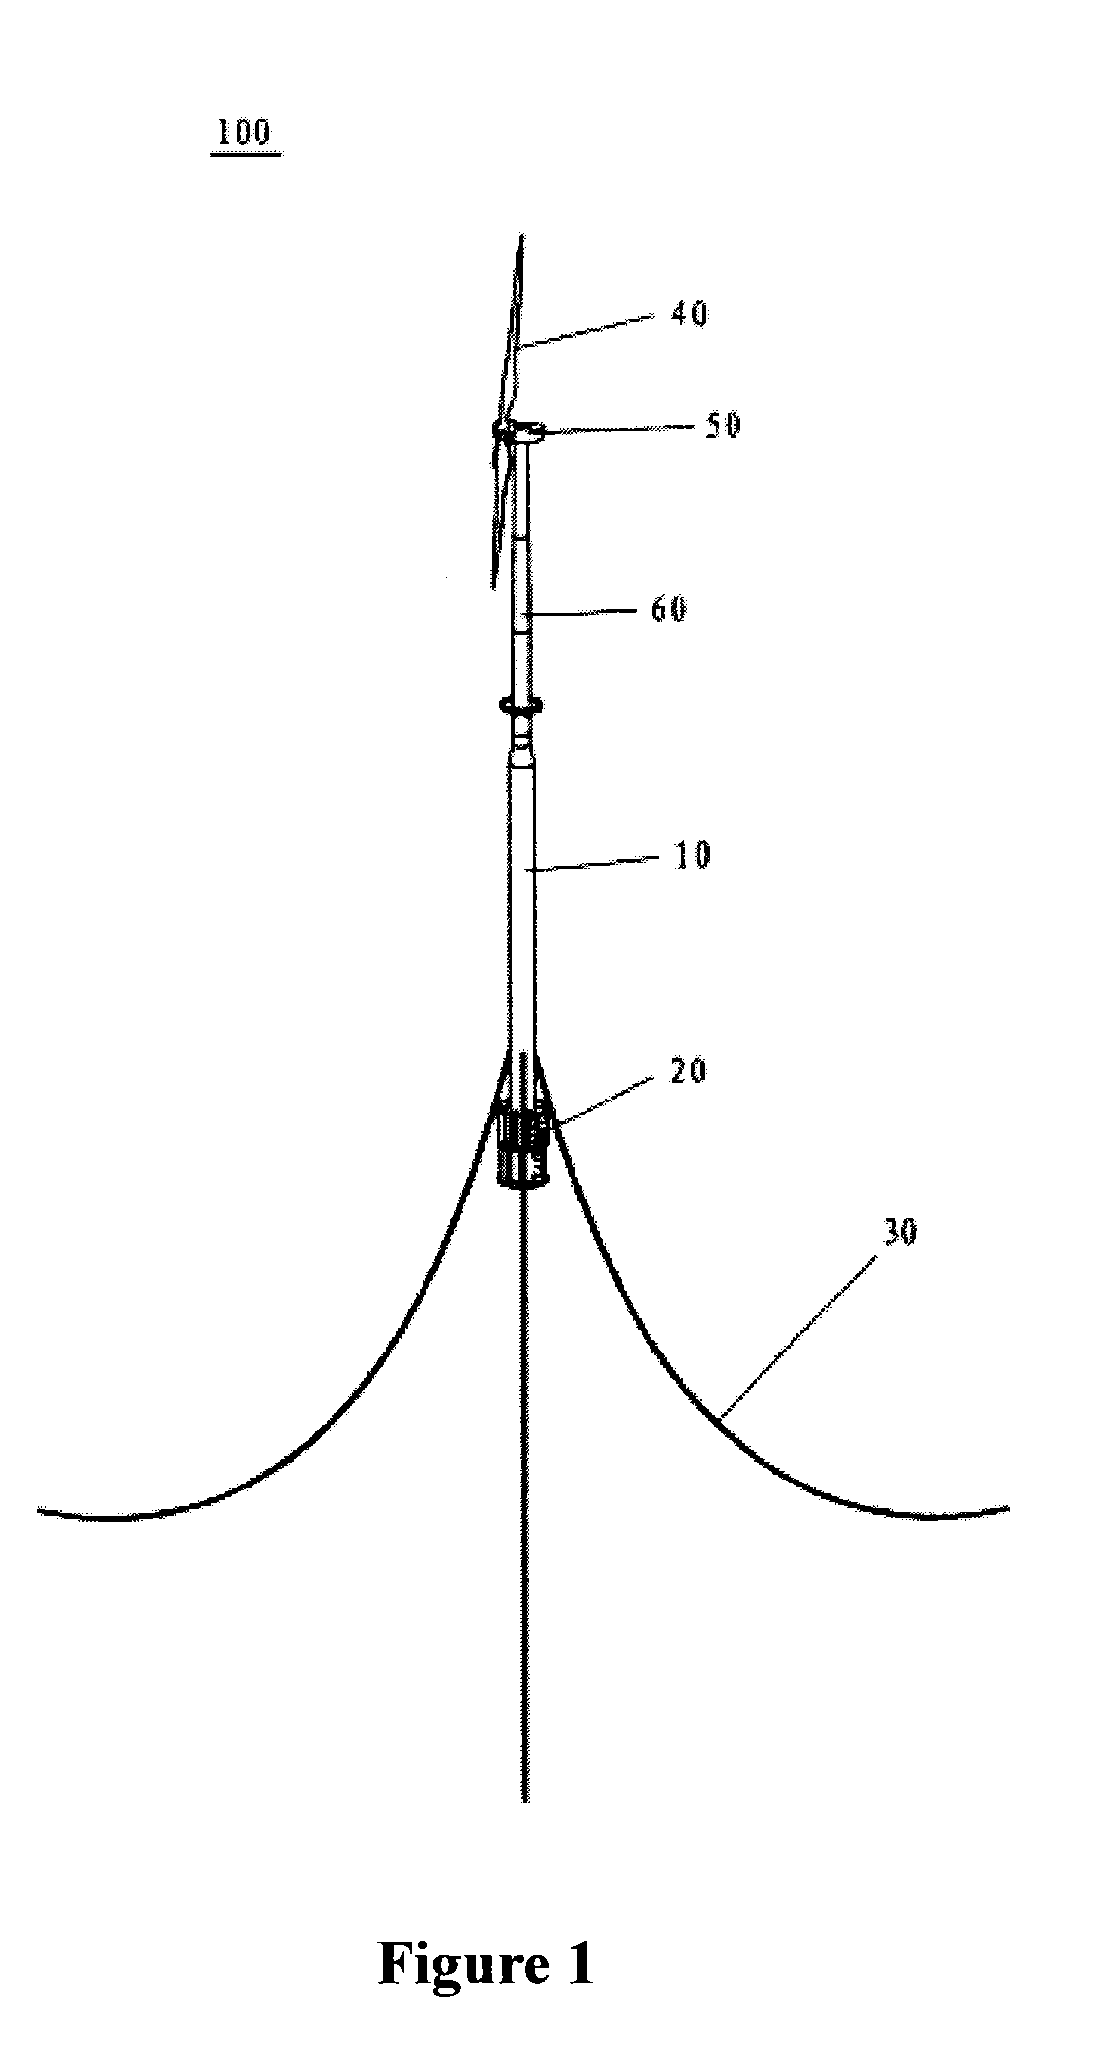 Movement inhibiting apparatus for floating offshore wind turbine and floating base used for offshore wind turbine